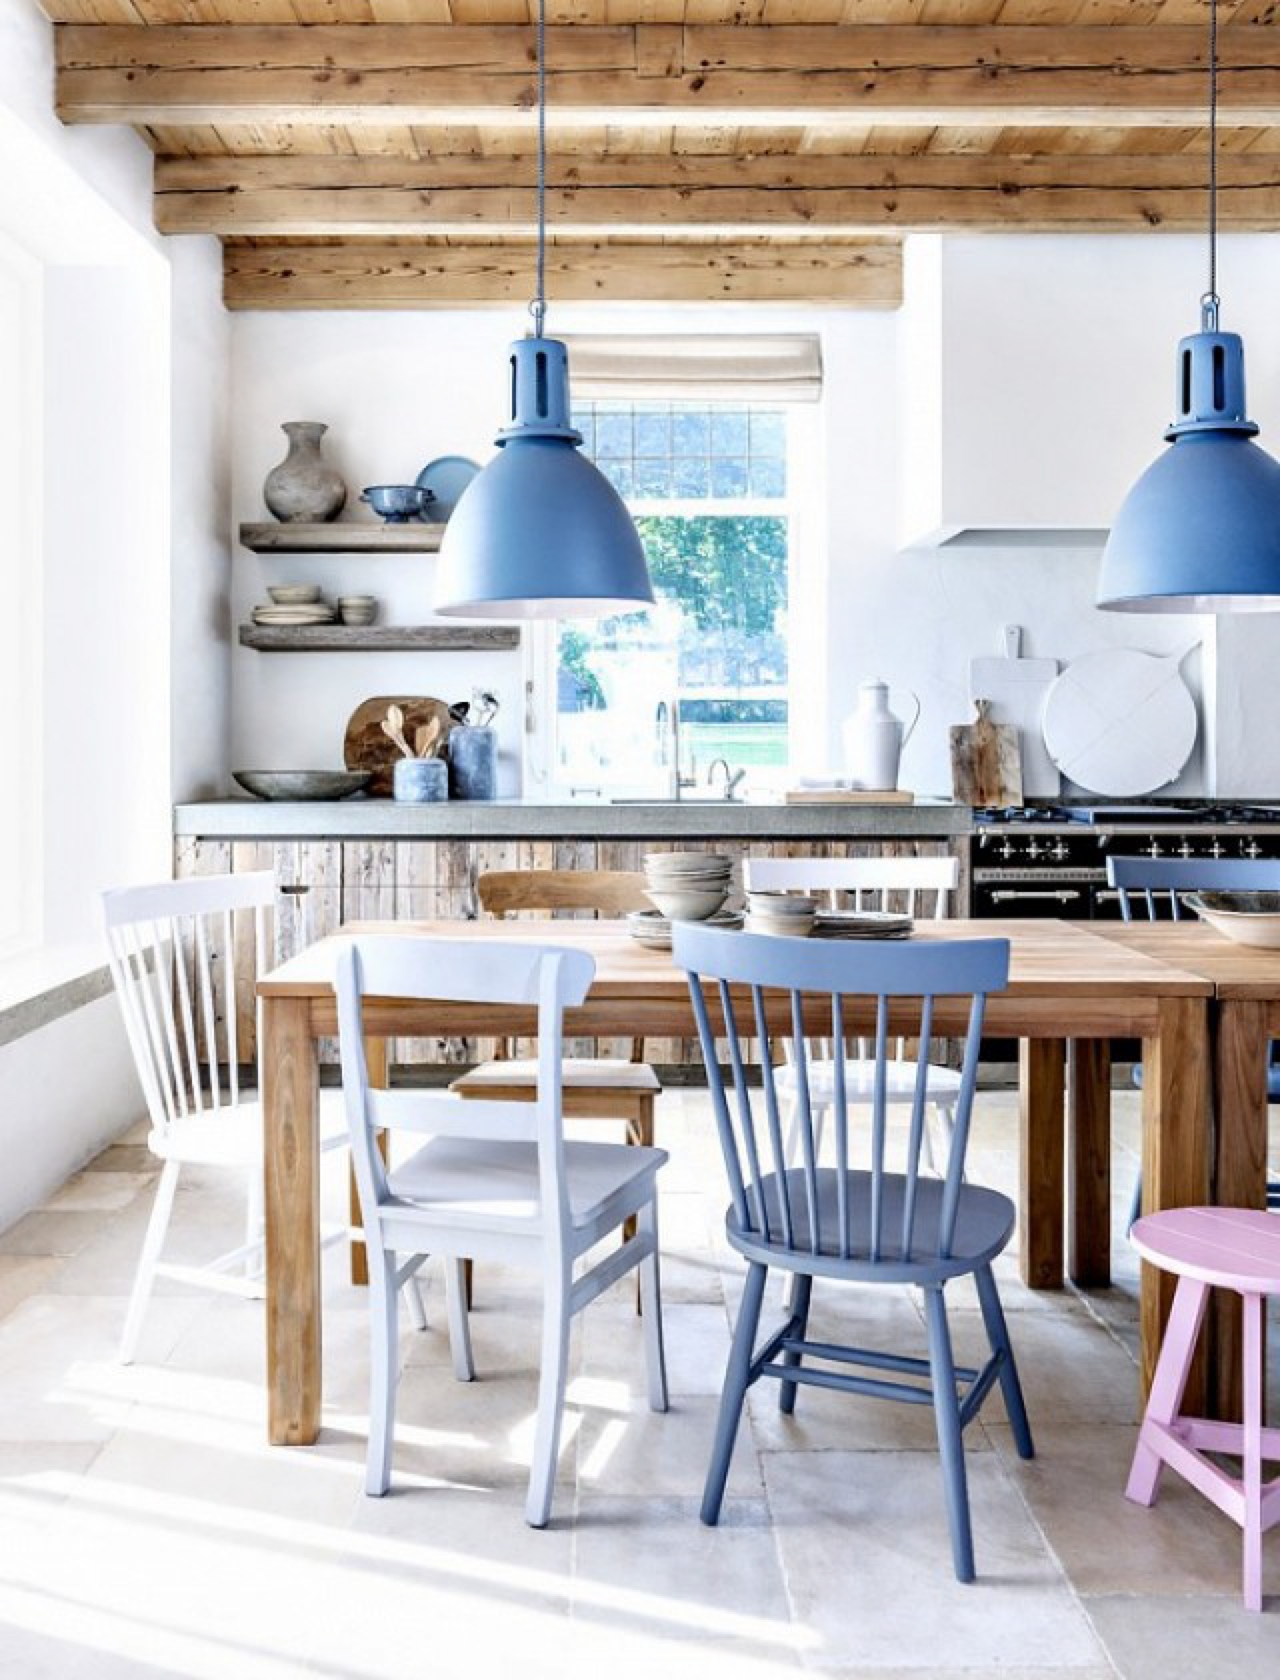 Introducing Colour Into Your Dining Room Decor Has Never Been So Easy 1